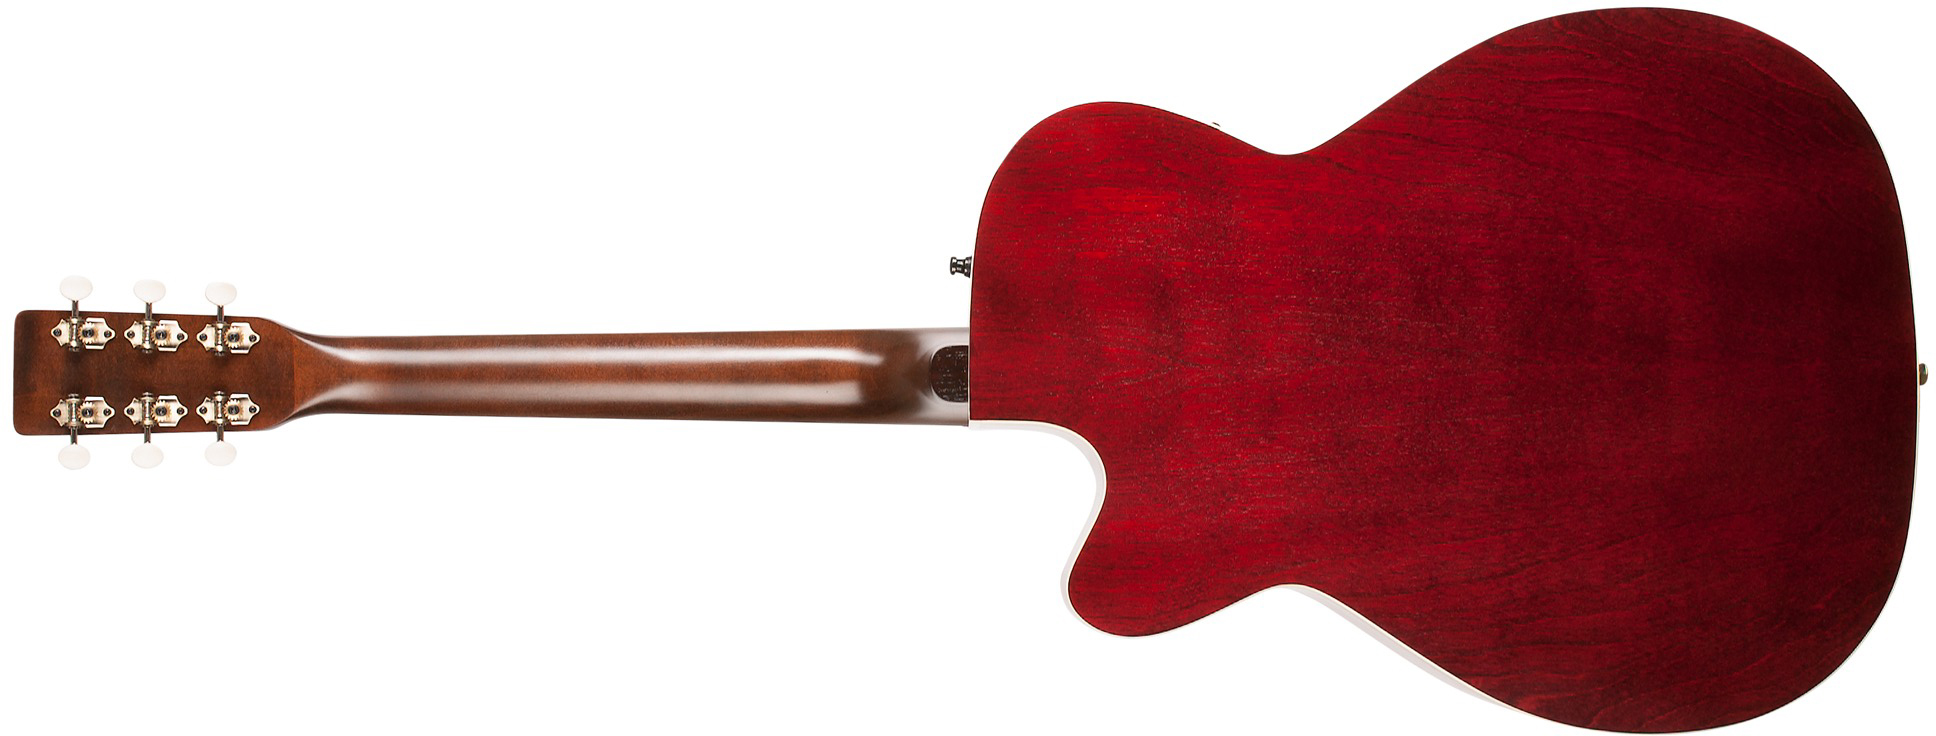 Art Et Lutherie Legacy Cw Presys Ii Concert Hall Cedre Merisier Rw - Tennessee Red - Electro acoustic guitar - Variation 1